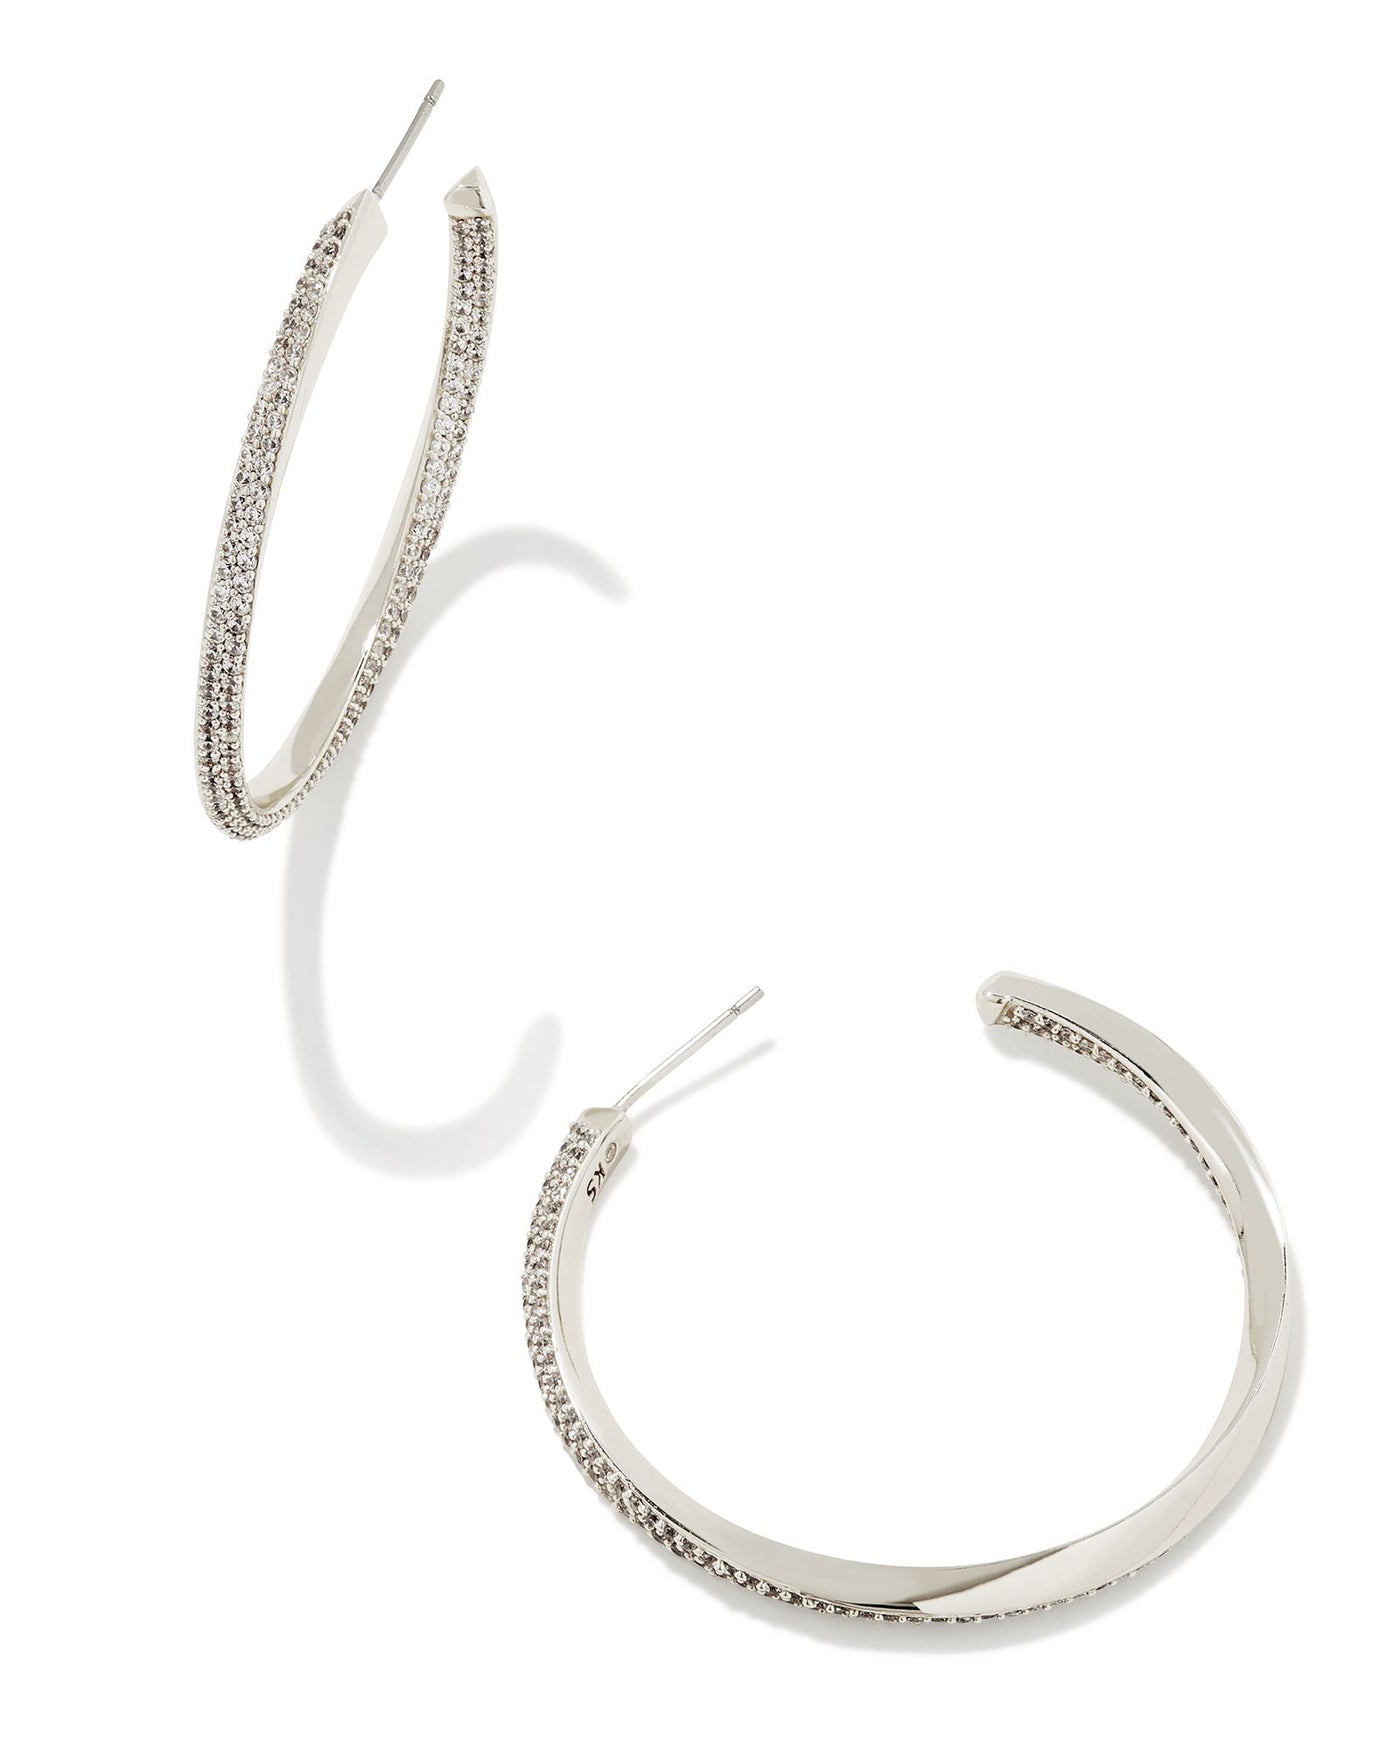 Kendra Scott Ella Hoop Earrings White Crystal-Earrings-Kendra Scott-Market Street Nest, Fashionable Clothing, Shoes and Home Décor Located in Mabank, TX